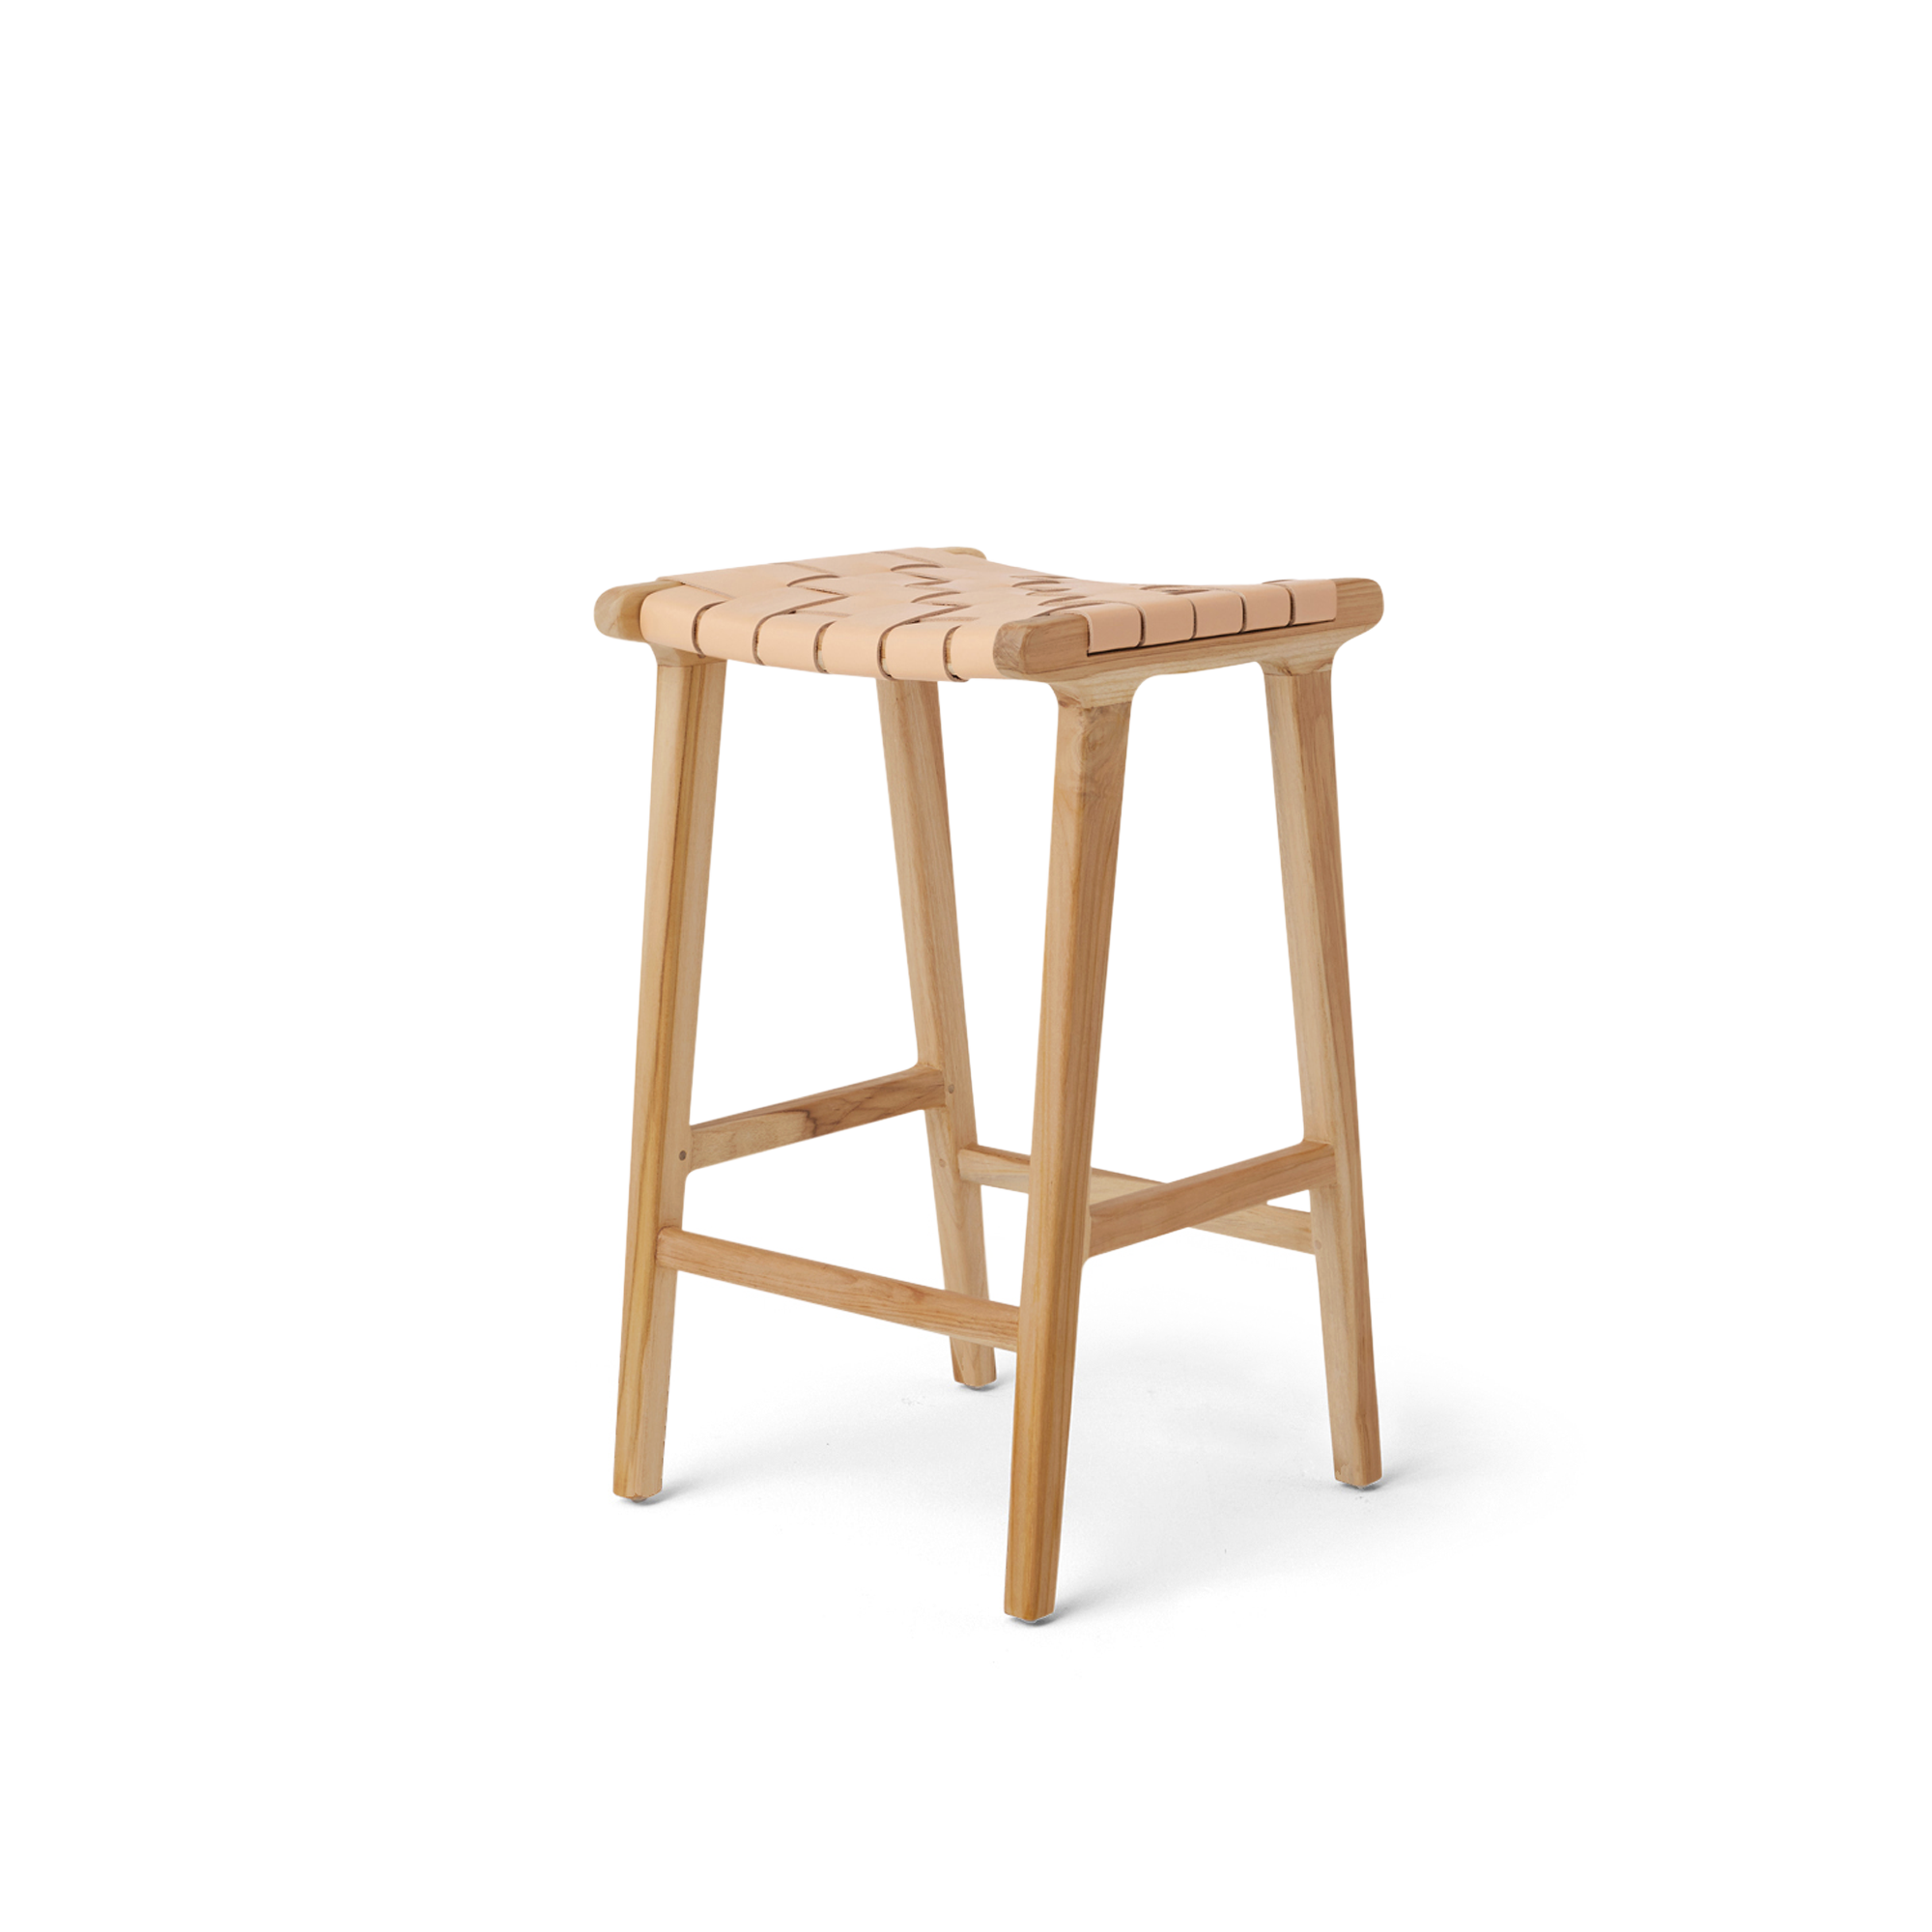 open box - stool #3 in natural